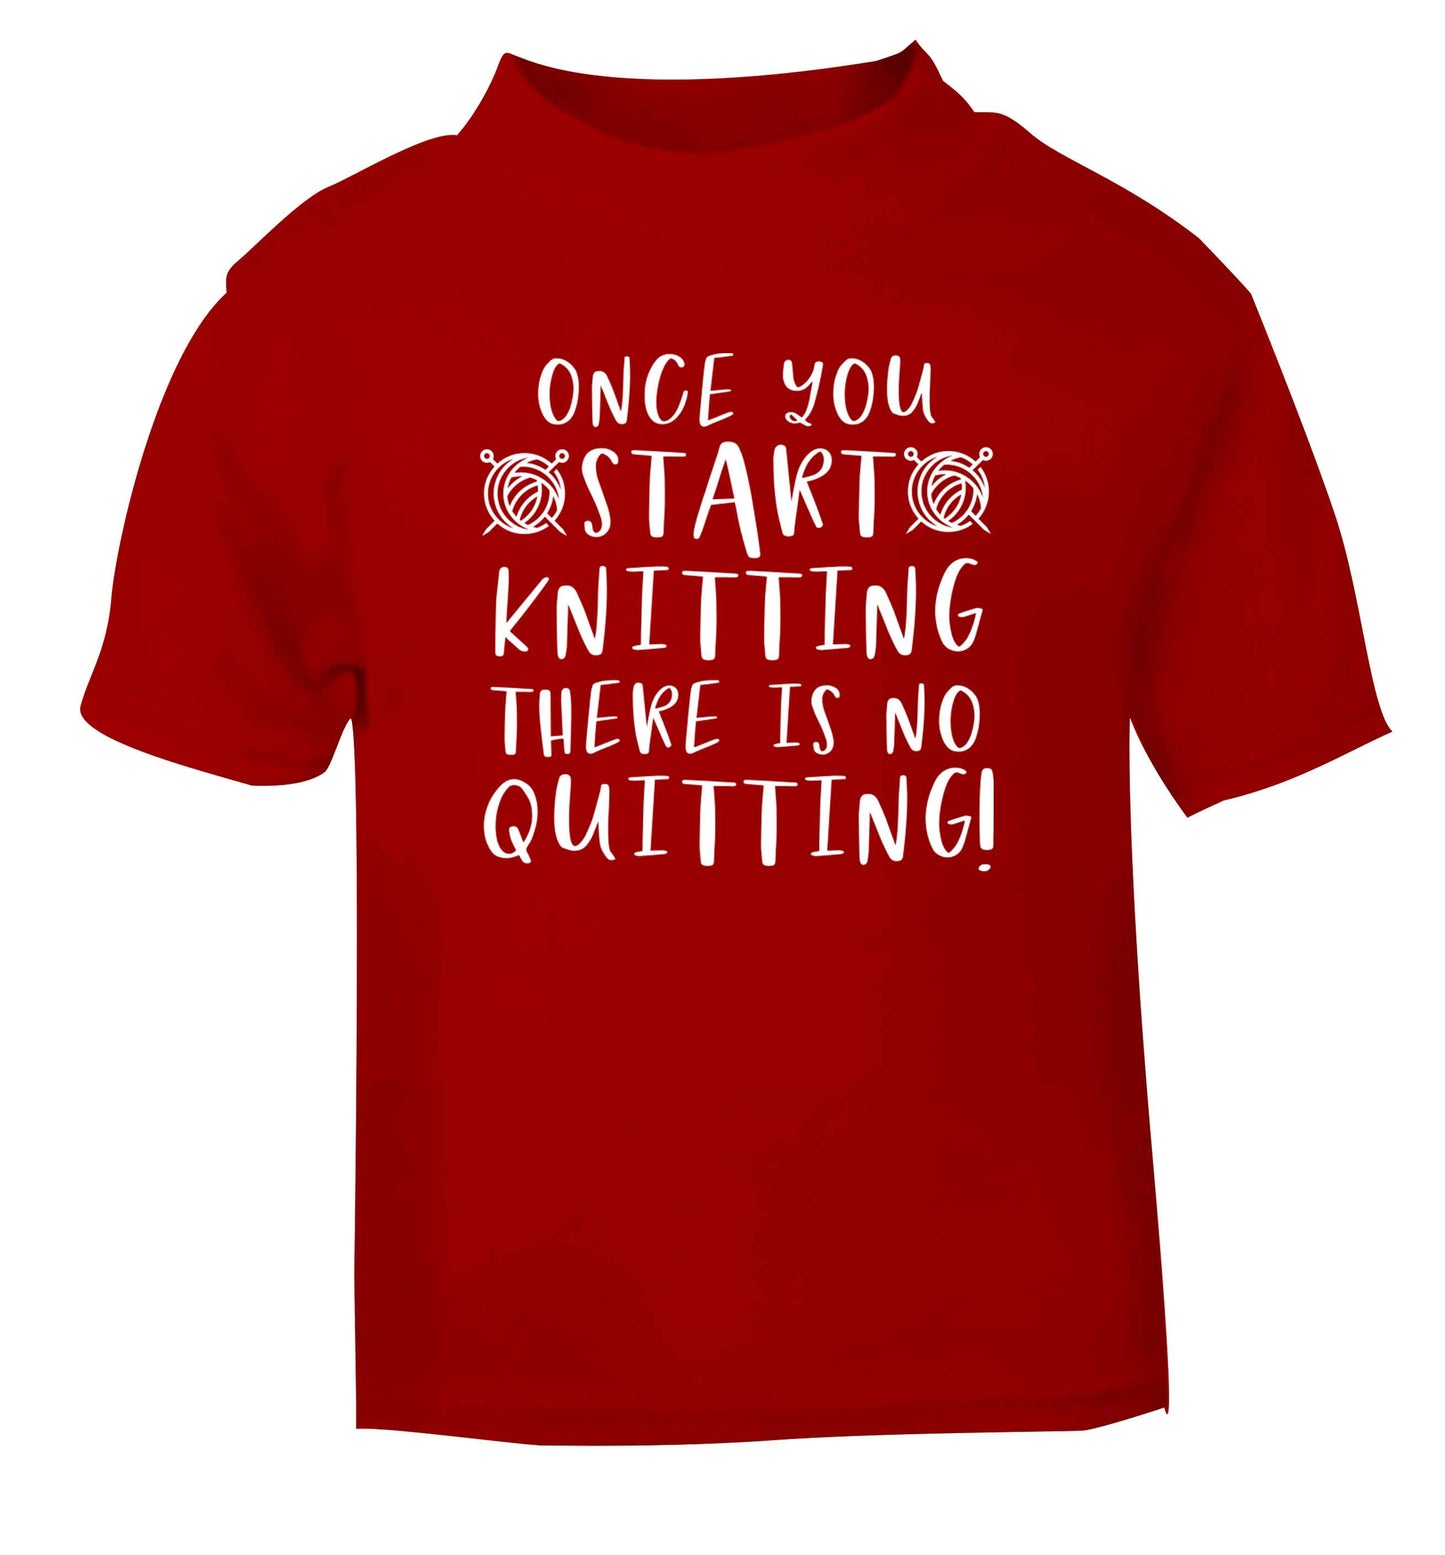 Once you start knitting there is no quitting! red Baby Toddler Tshirt 2 Years